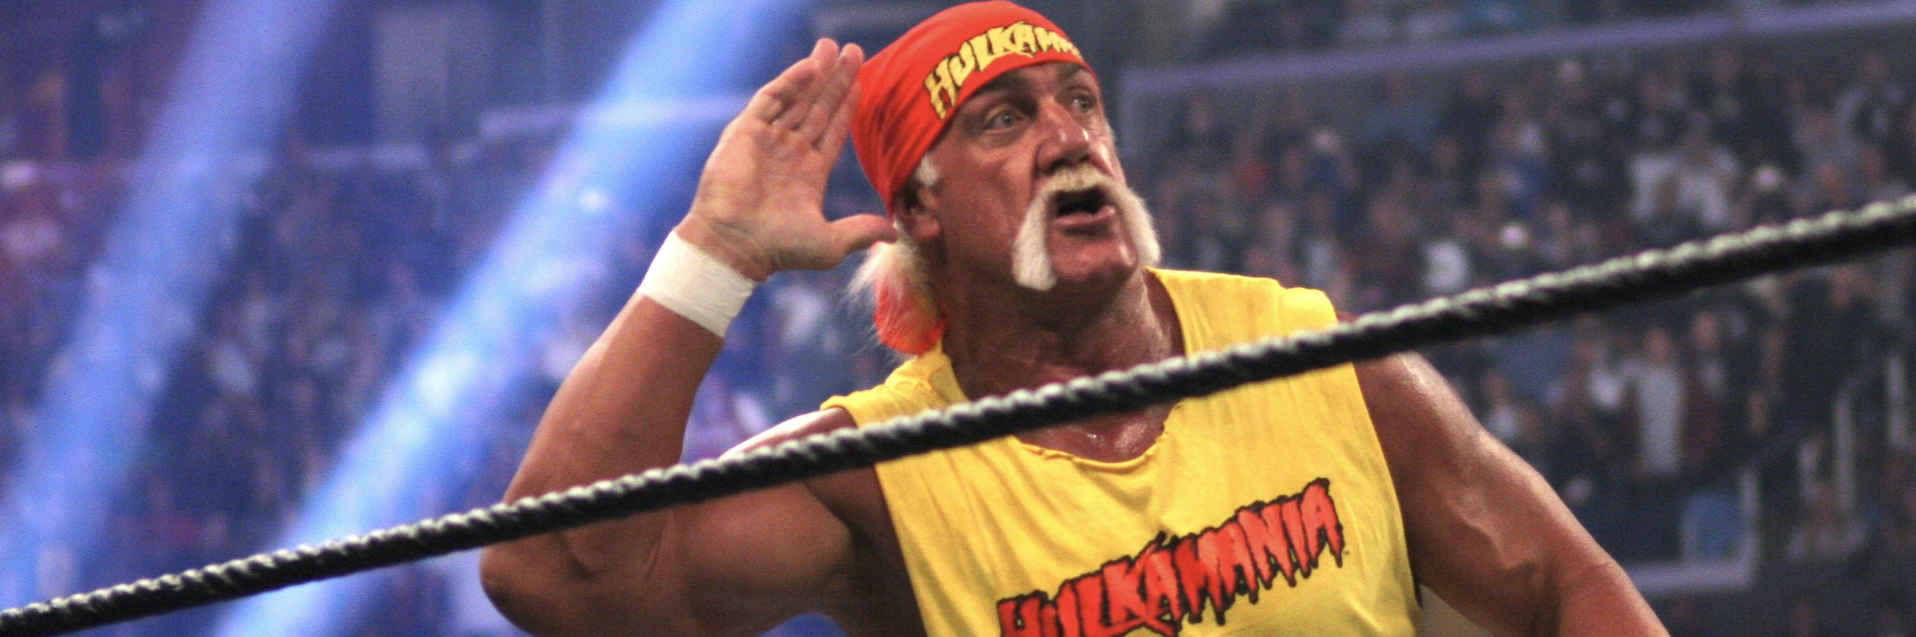 UNITED STATES - APRIL 03: Wrestle Mania 21 in Los Angeles, United States on April 03, 2005 - Hulk Hogan at Wrestle Mania 21 at Staples Center. (Photo by Mike FANOUS/Gamma-Rapho via Getty Images)